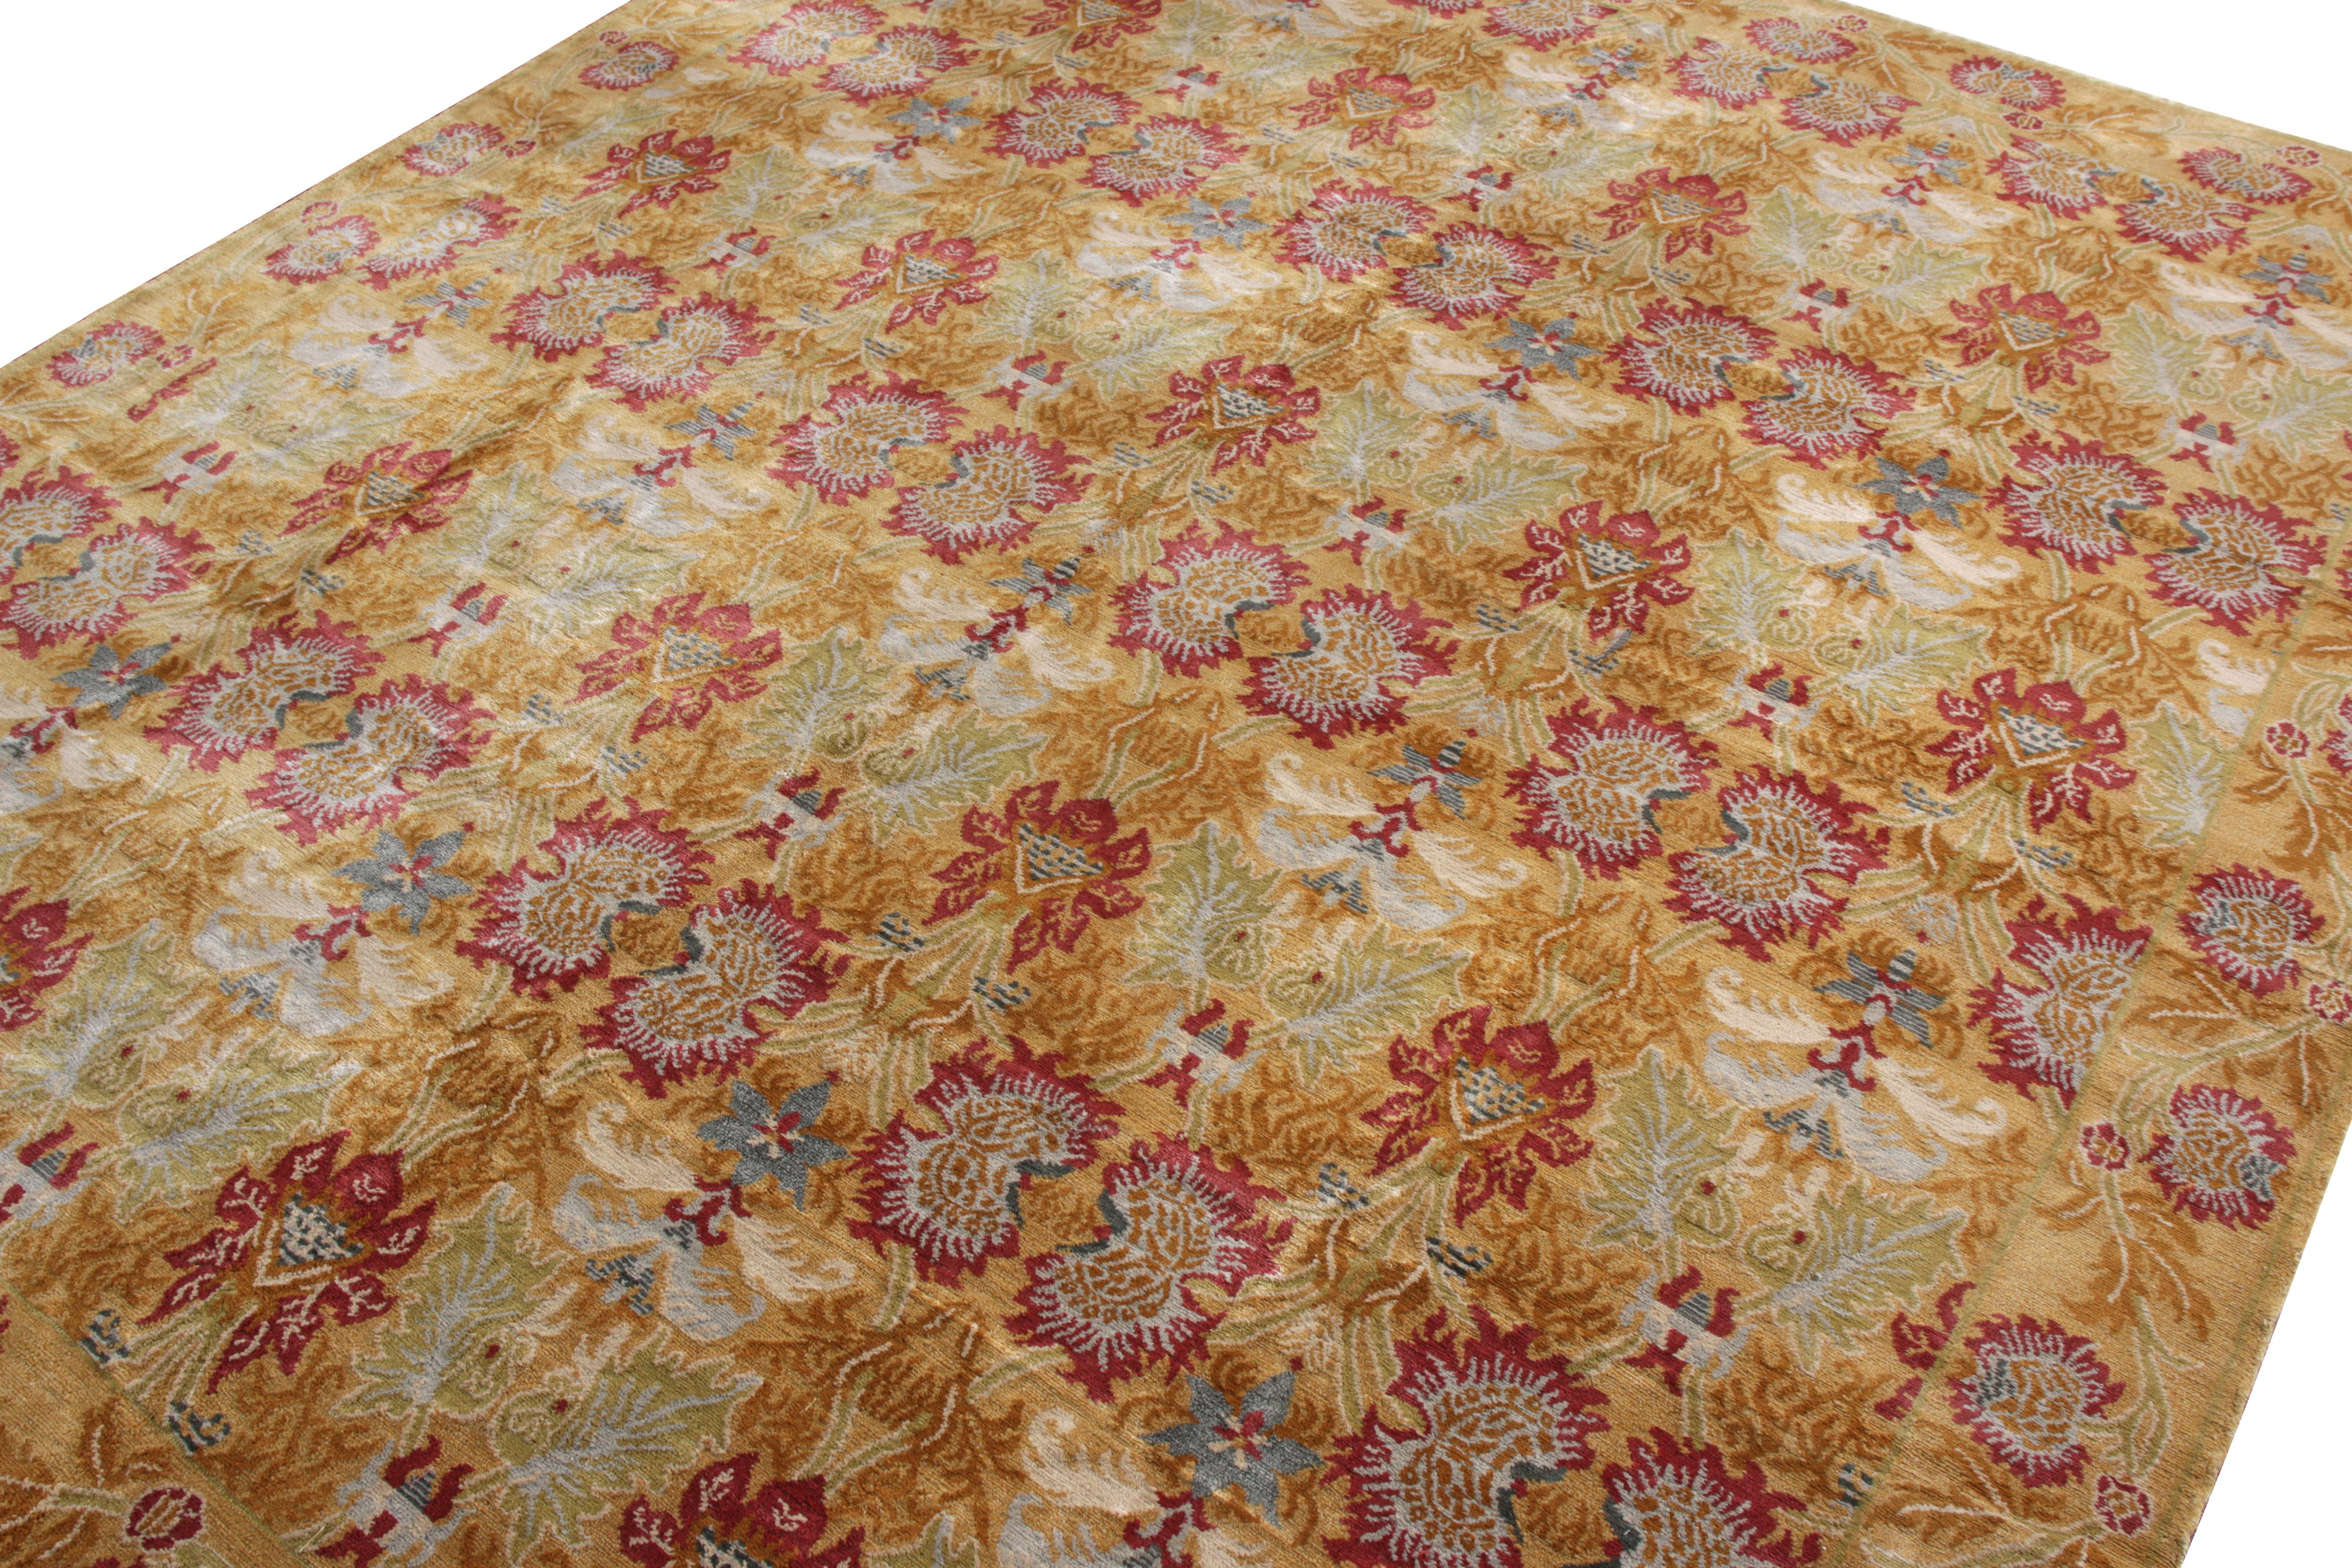 Spanish Rug & Kilim’s European Style Rug in Gold and Red All Over Floral Pattern For Sale